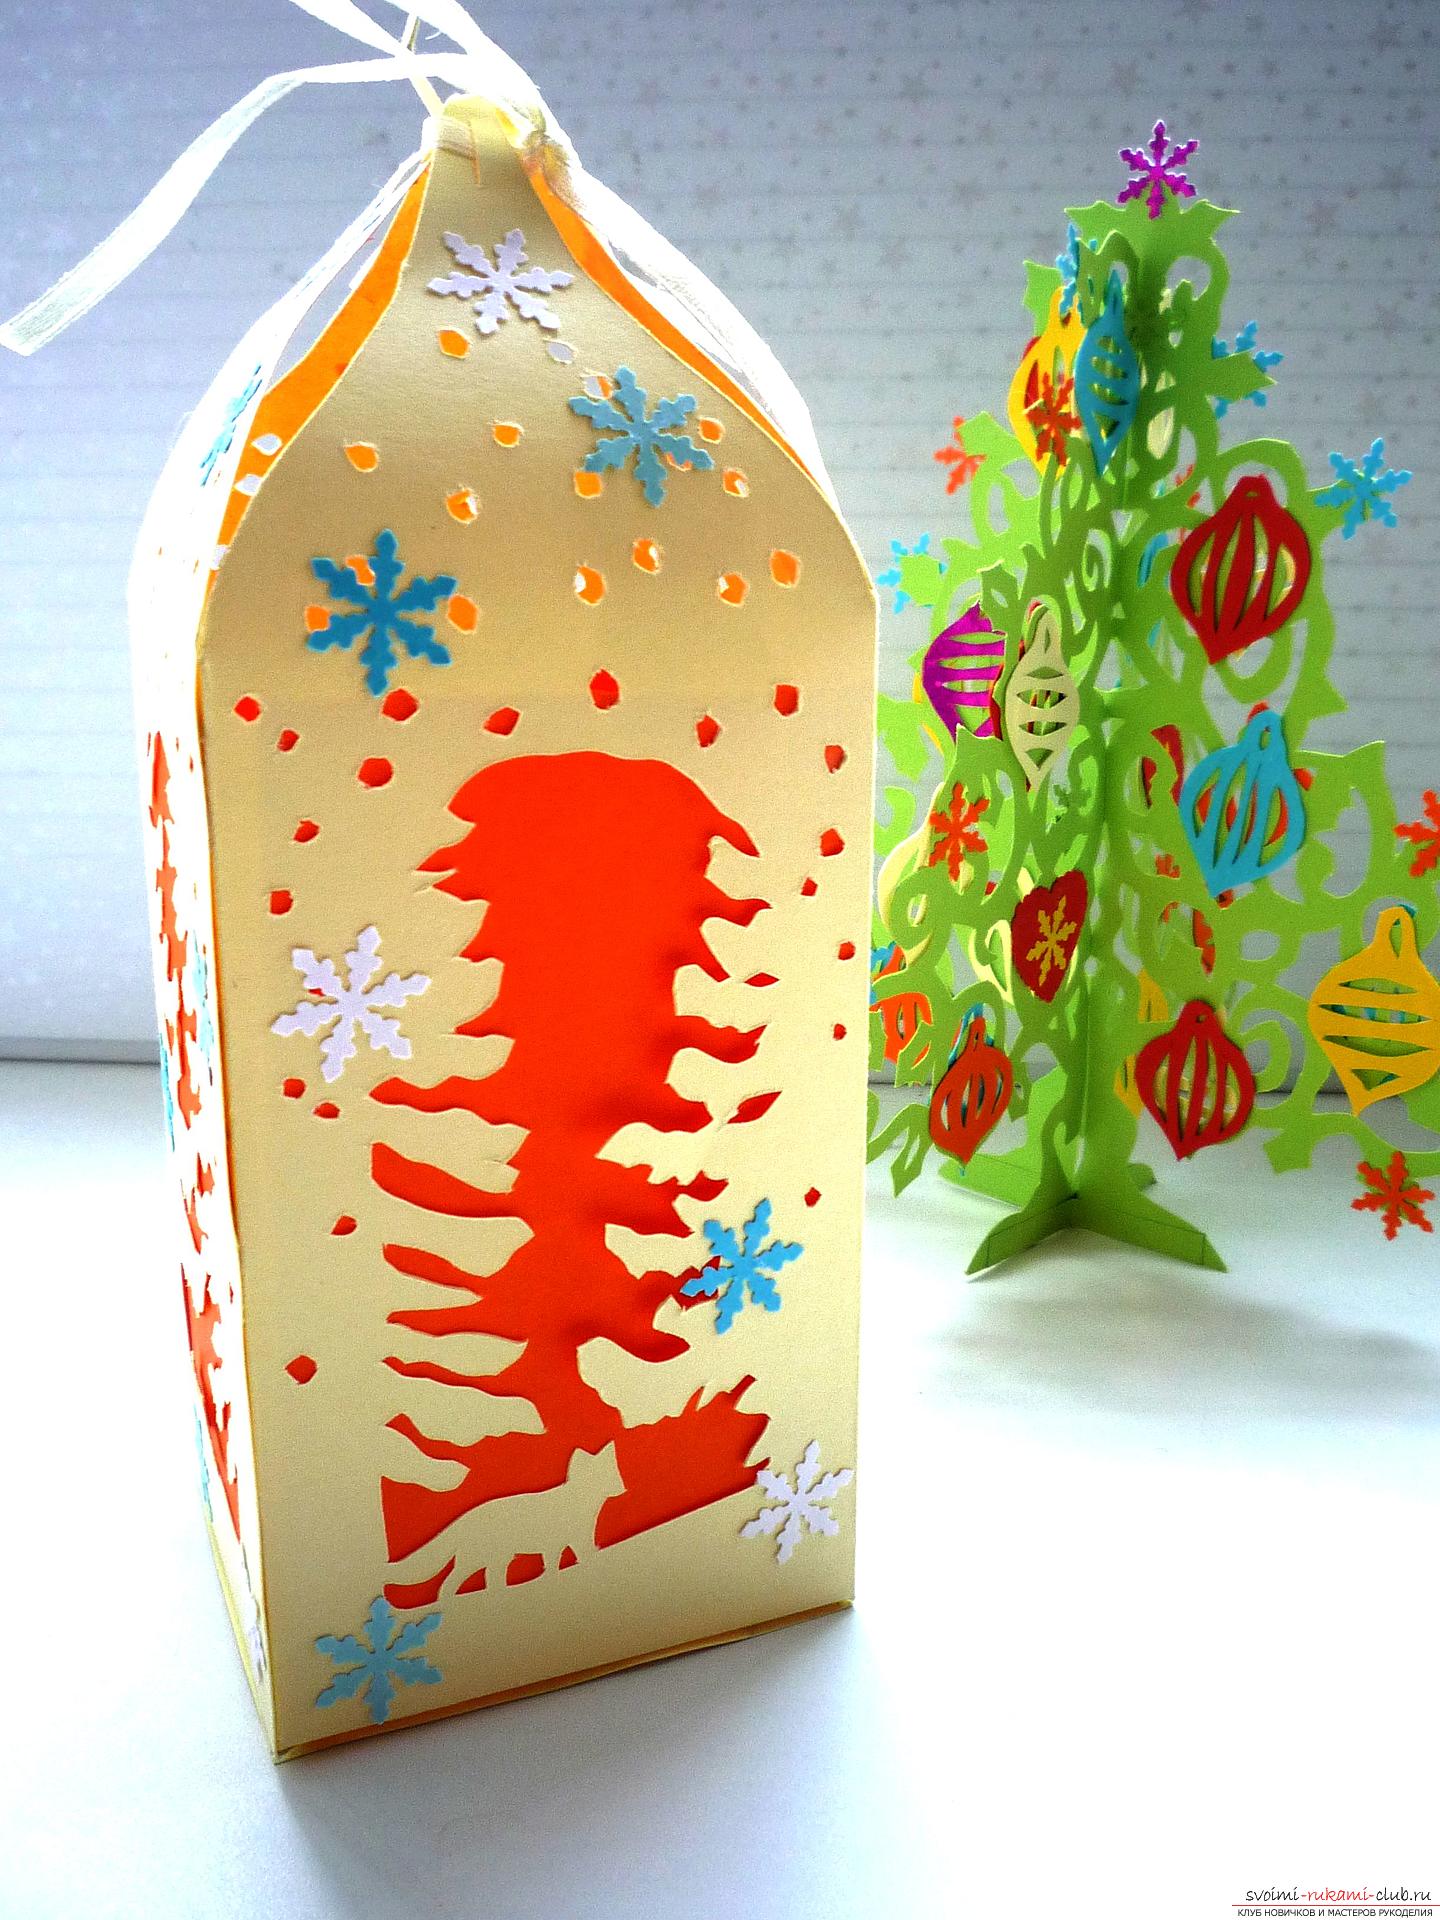 The master class will teach you how to make a New Year's craft - a box for a sweet gift 